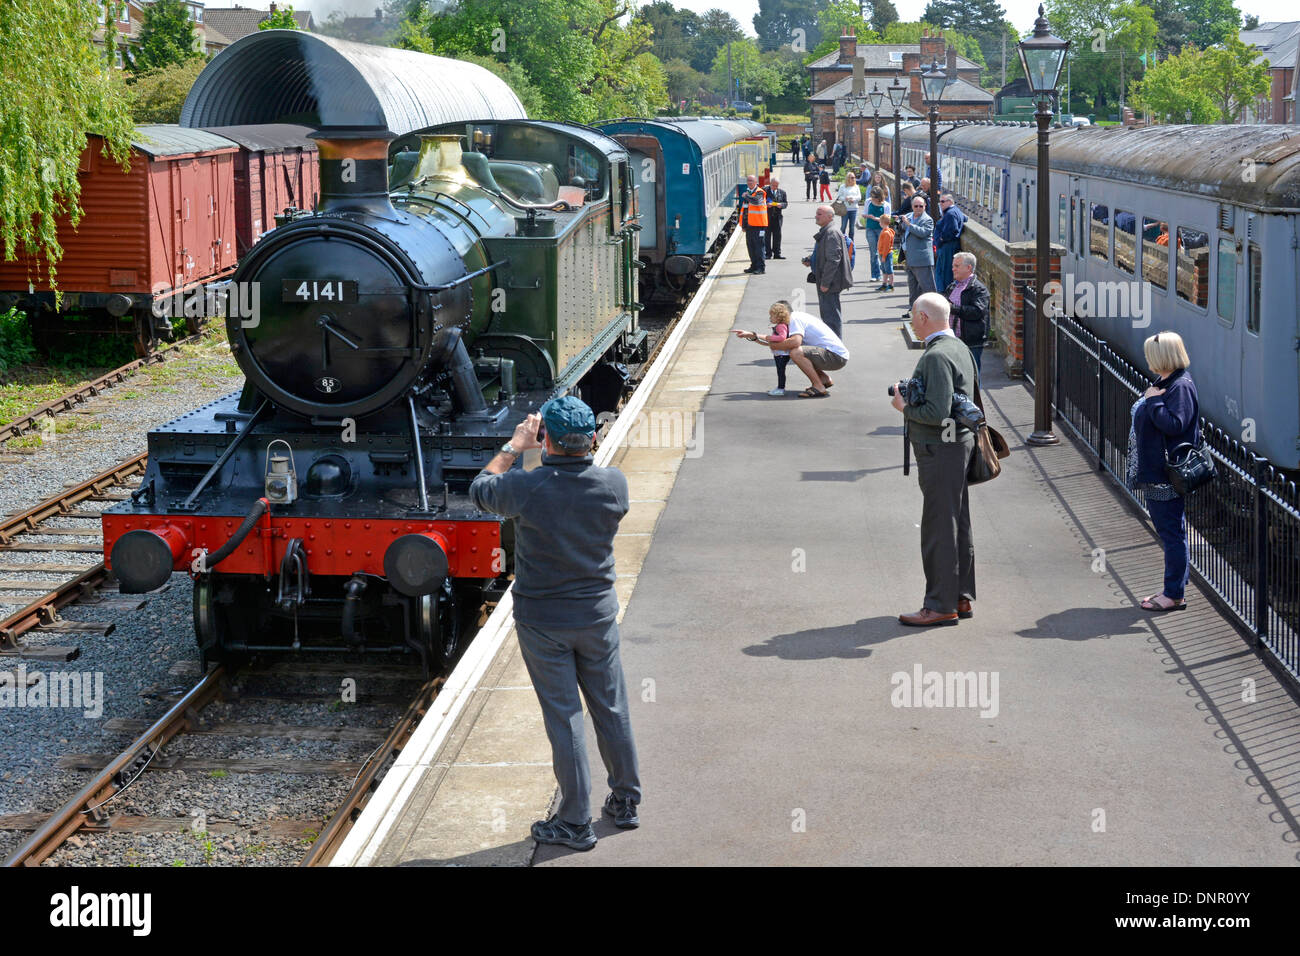 Enthusiasts on the platform at Ongar watching steam locomotive 4141 on the Epping Ongar heritage railway Essex England UK Stock Photo